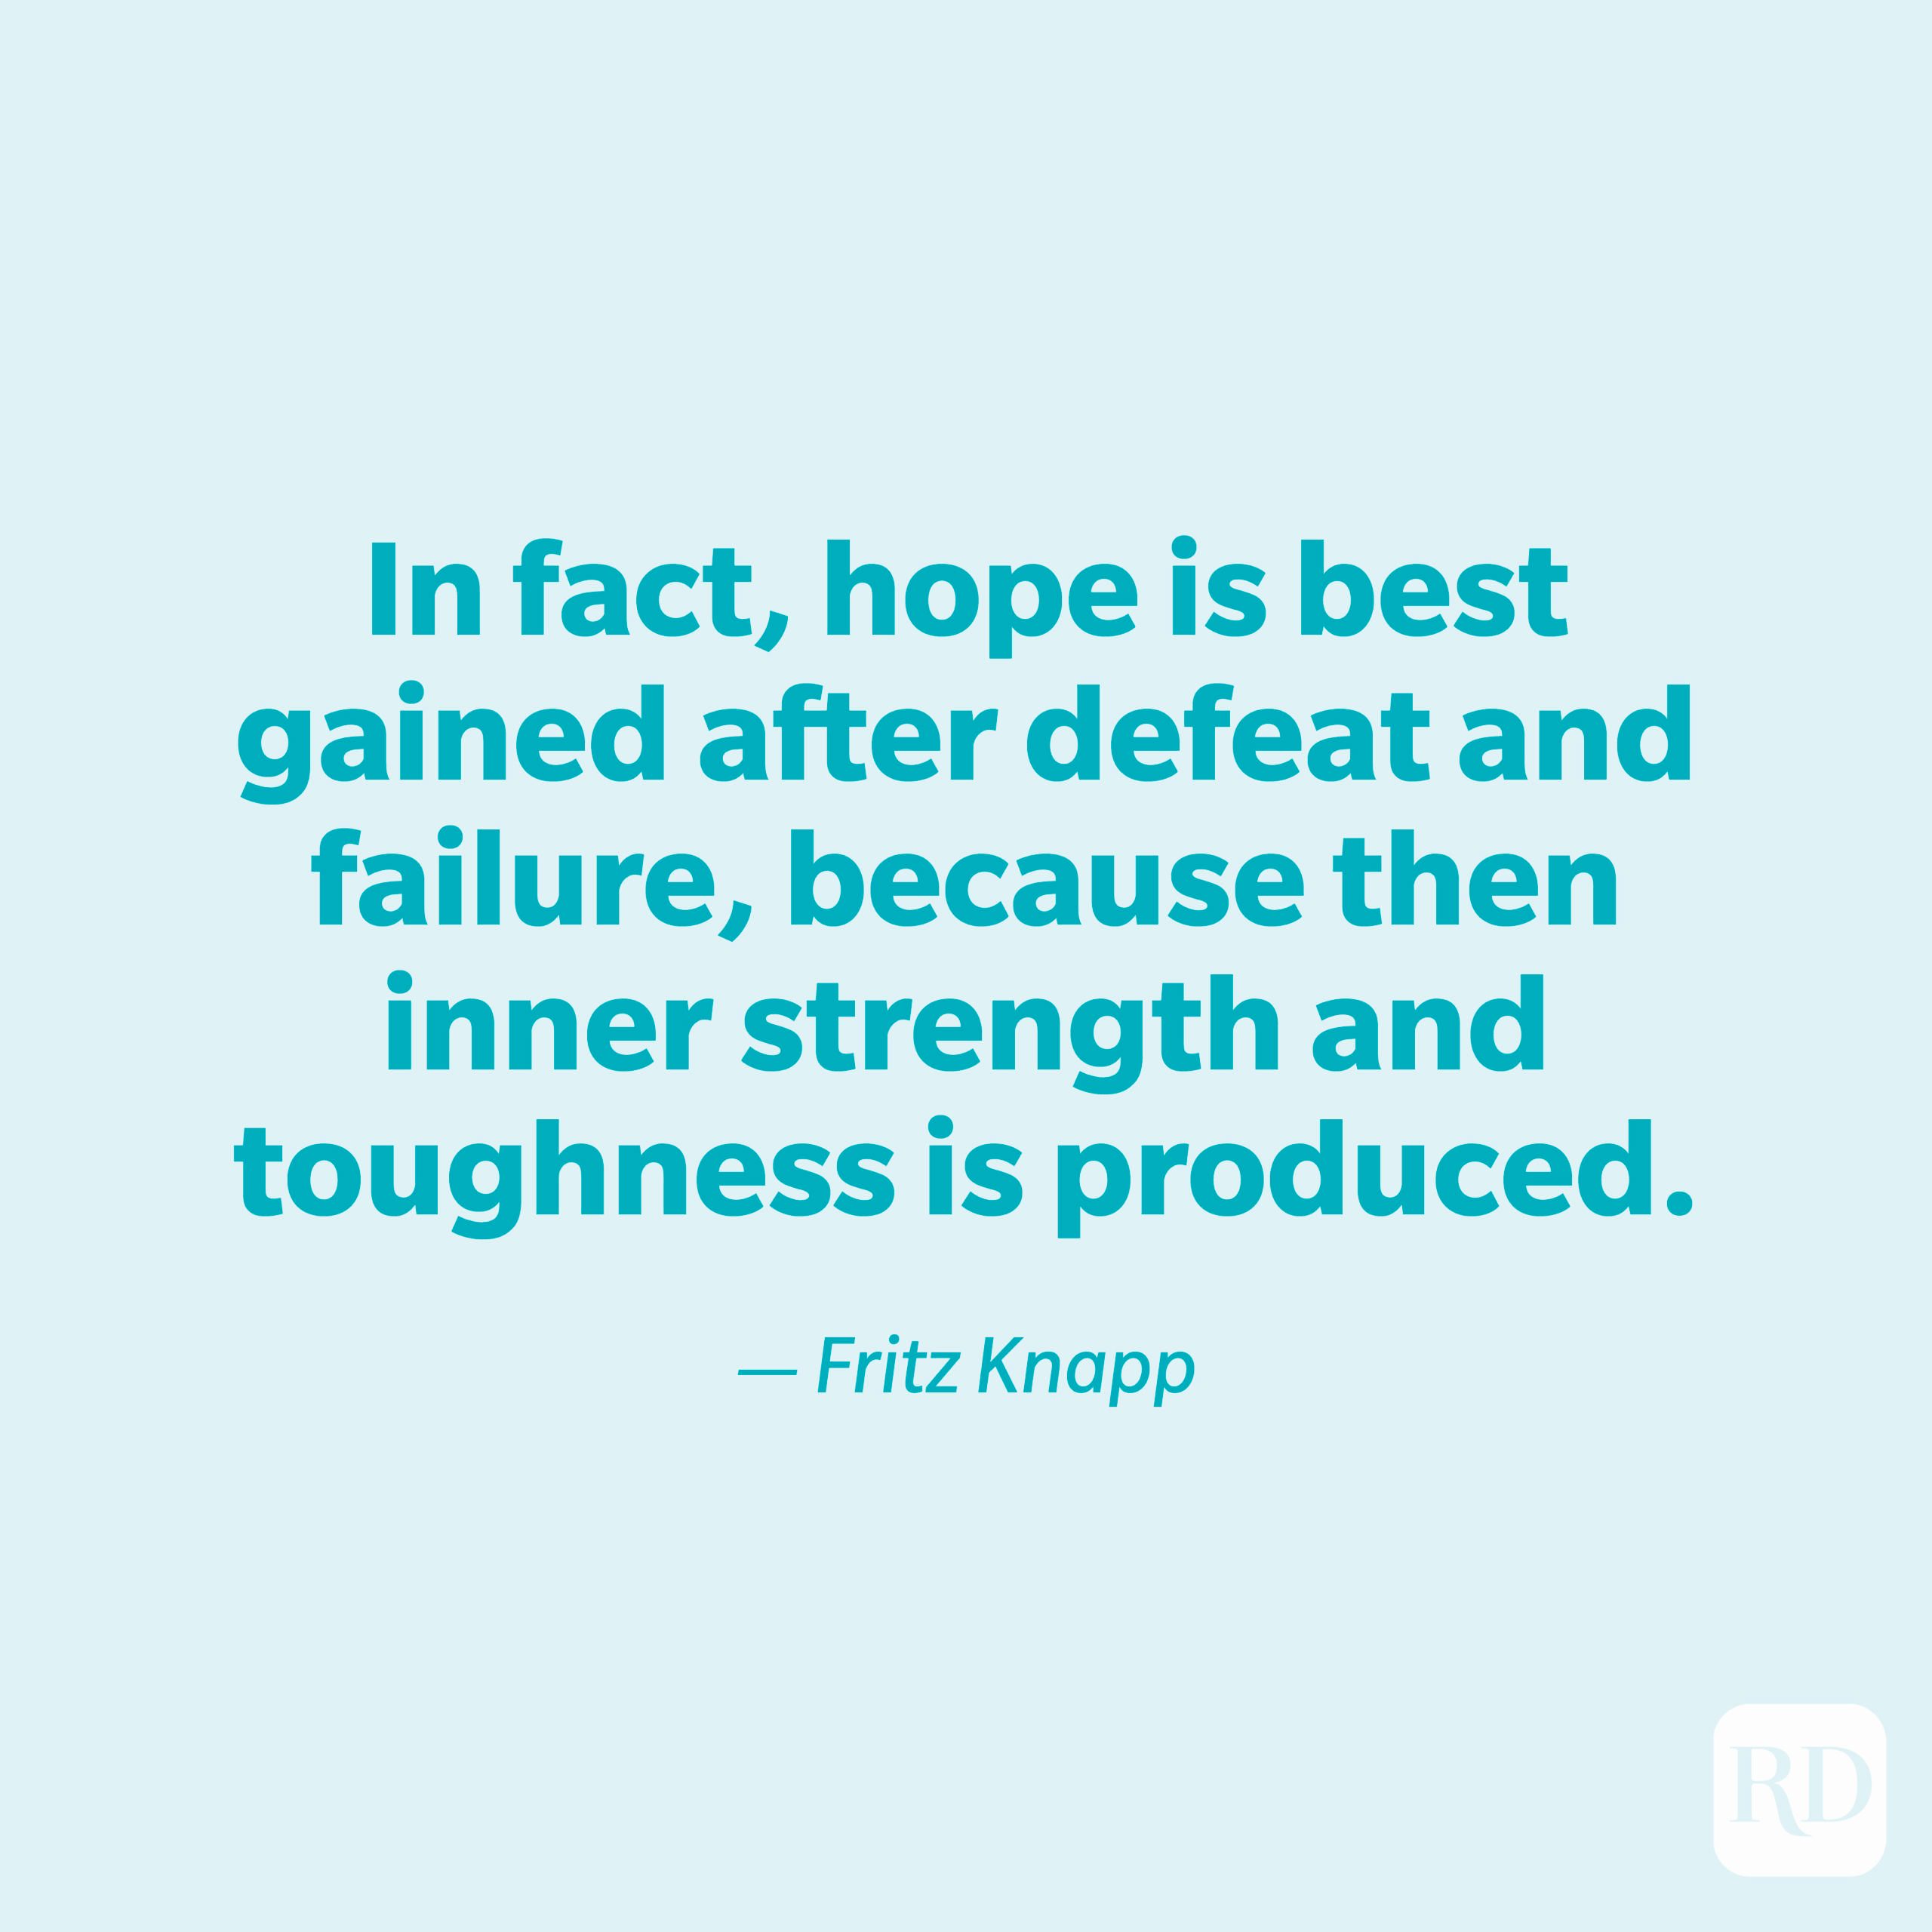 "In fact, hope is best gained after defeat and failure, because then inner strength and toughness is produced." —Fritz Knapp